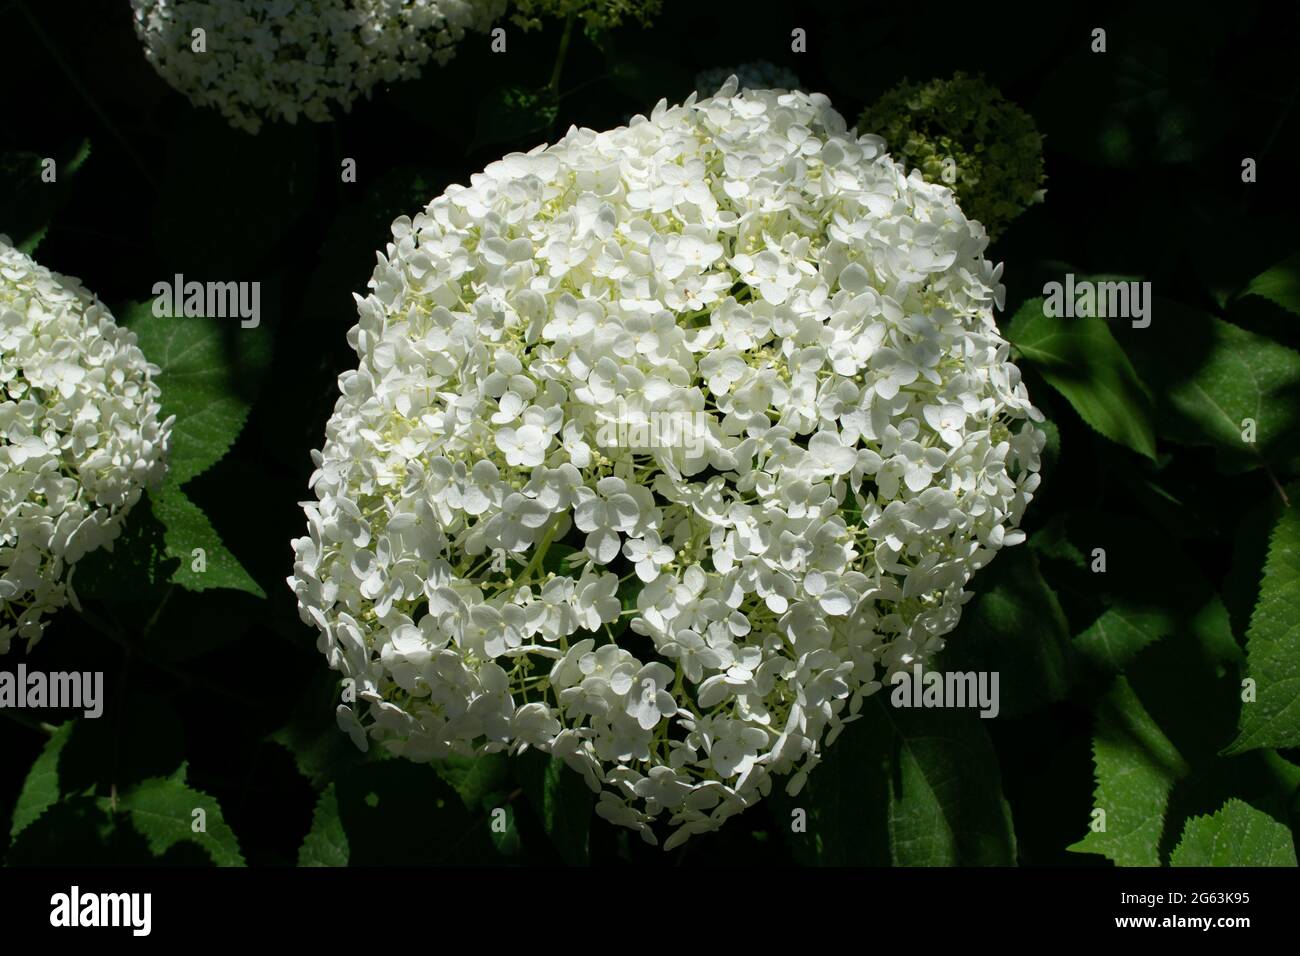 Closeup of a splendid white hydrangea plant, symbol of love, with its characteristic flowers. Stock Photo